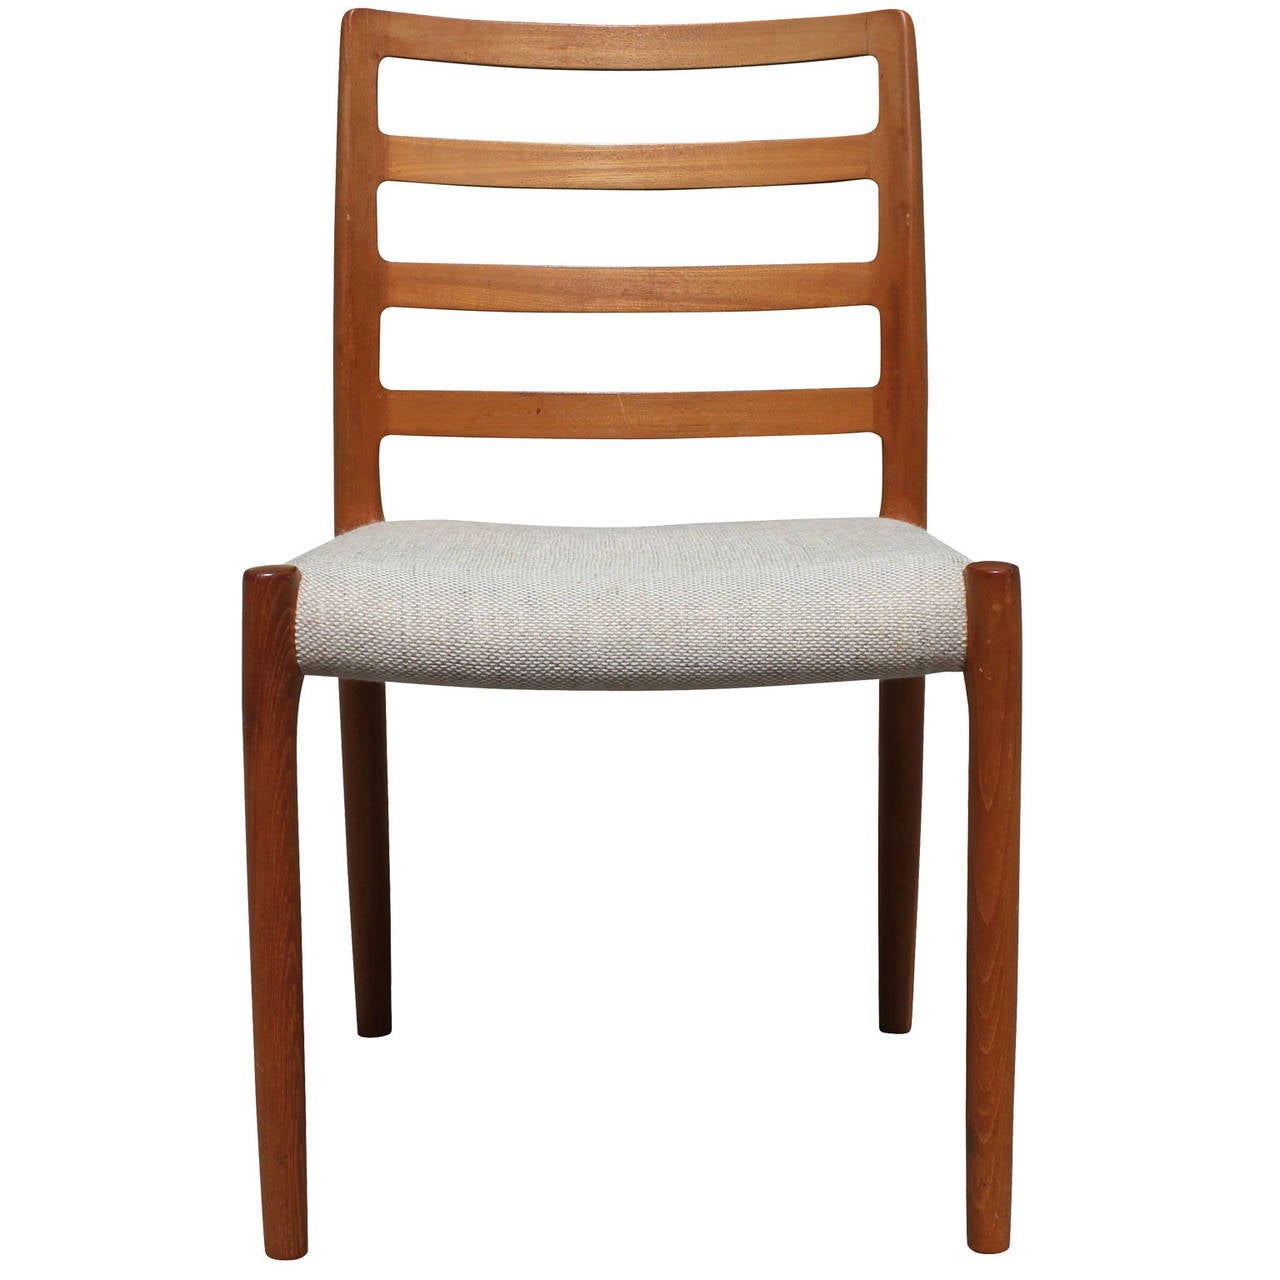 Great set of four Danish ladder back JL Moller Model #85 Dining Chairs. Teak chairs are upholstered in a neutral fabric which could use re-upholstery. Lovely set with soft curved edges.